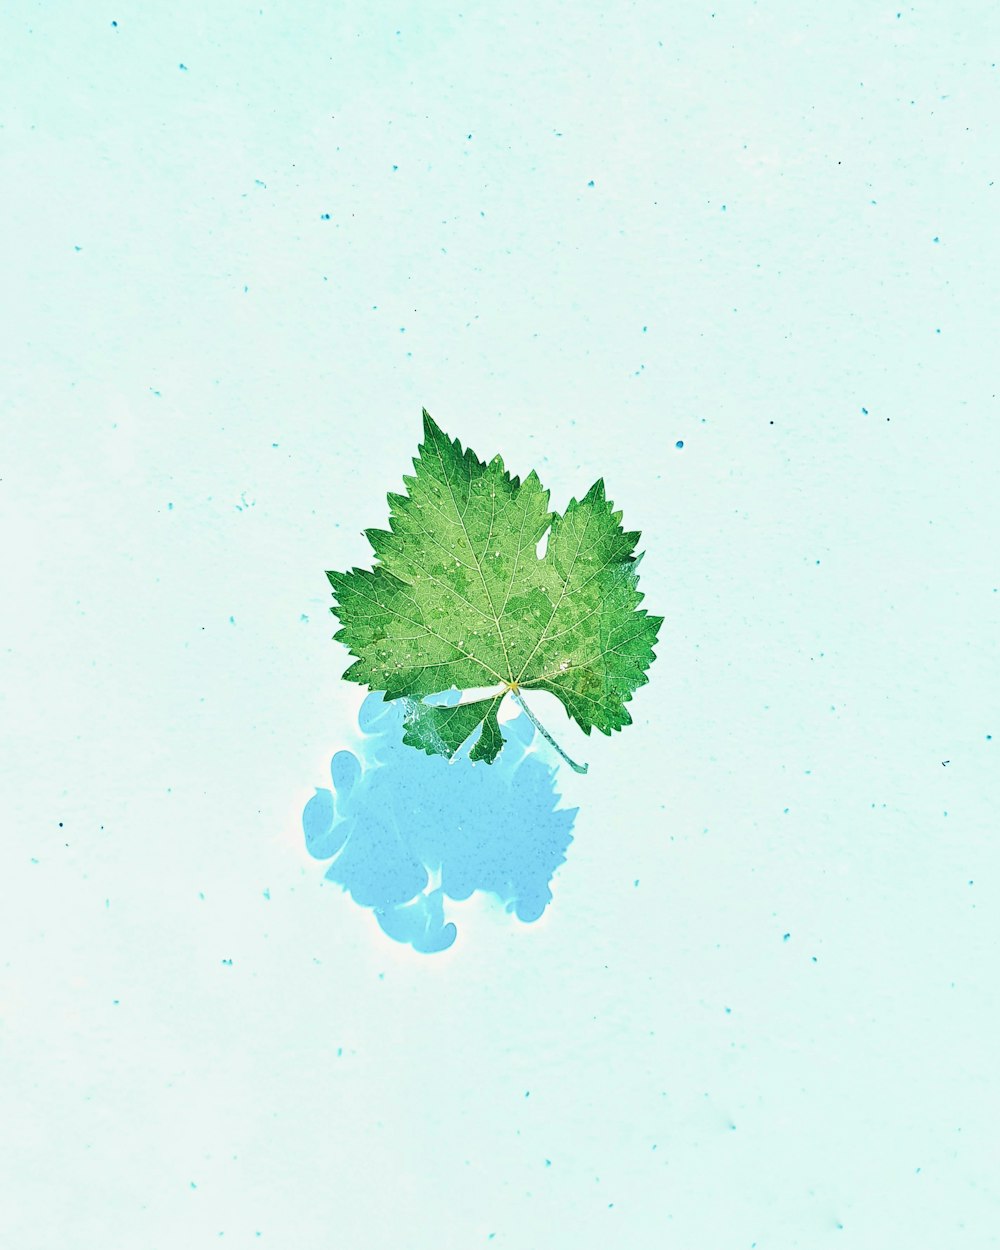 green and blue tree illustration